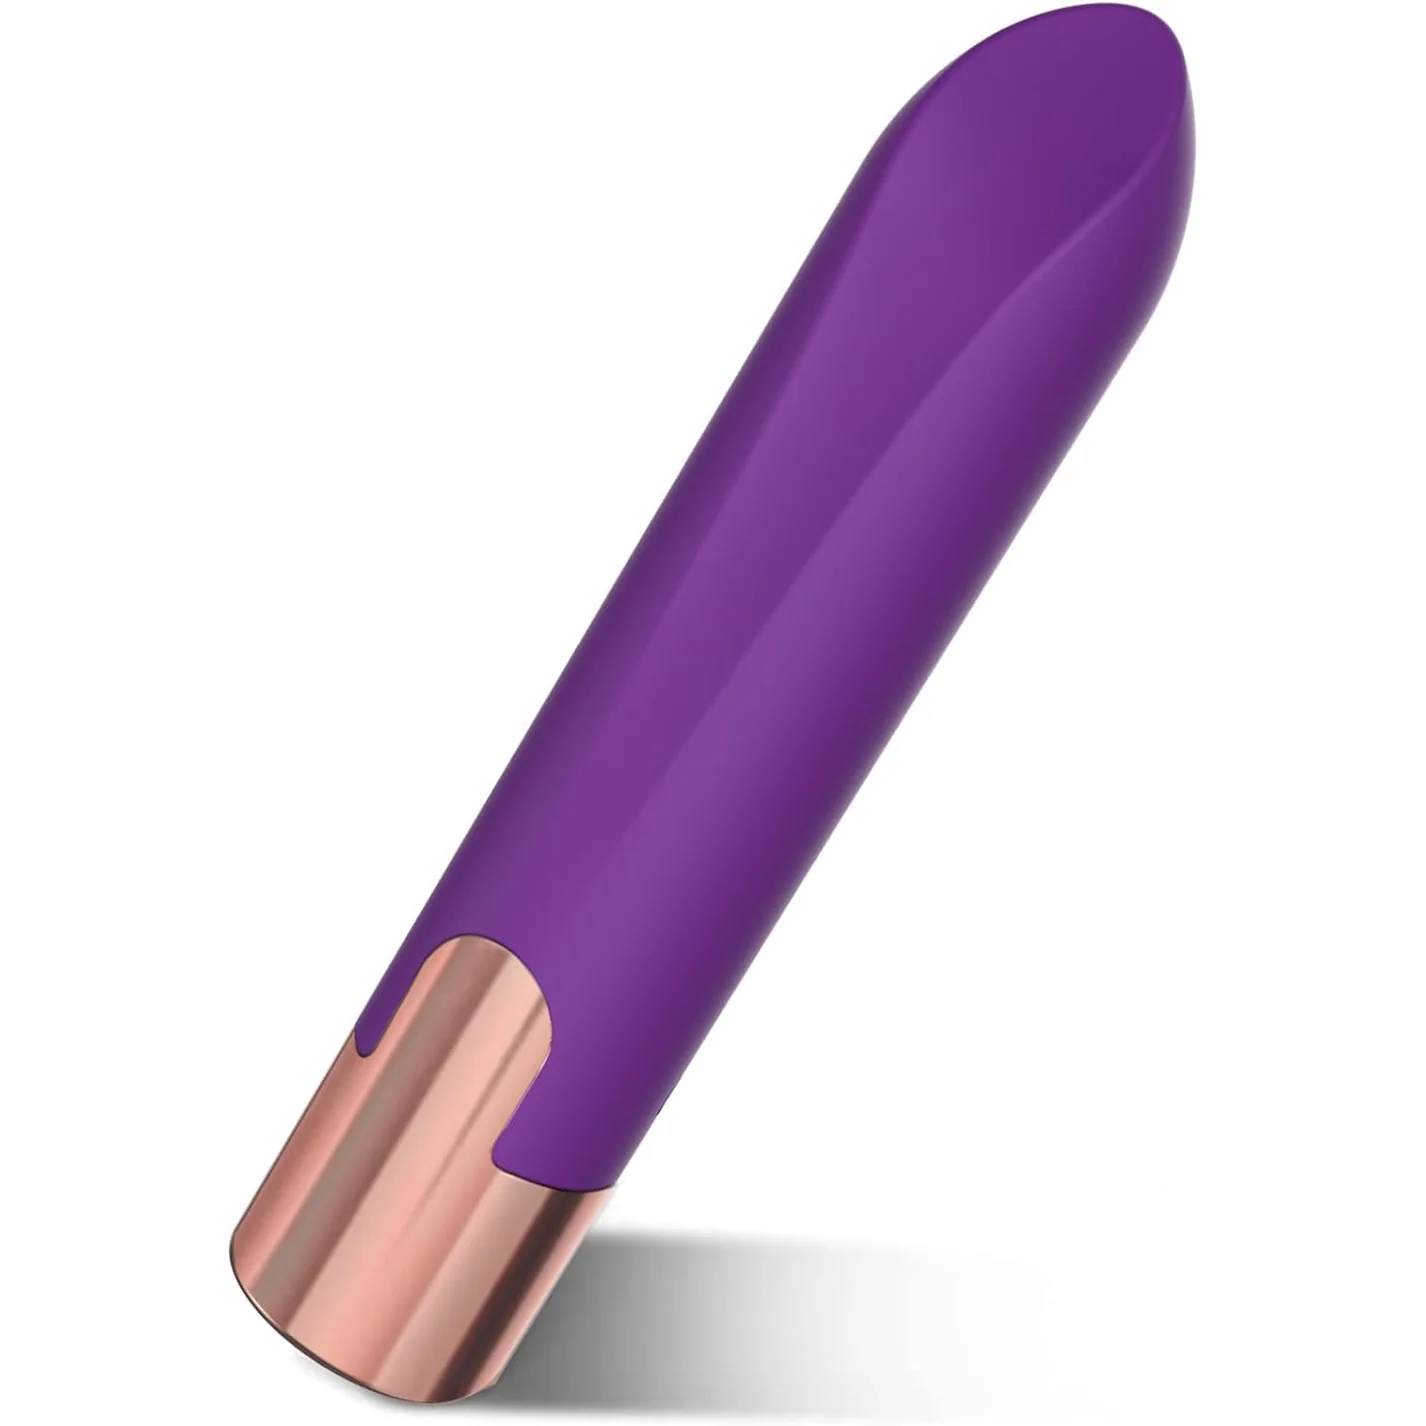 Bullet Vibrator with Lipstick Shape for Clitoral Nipple Testis Stimulator, Mini G spot Silicone Massager with 10 Vibration Modes, Waterproof Adult Sex Toy for Women or Couples
